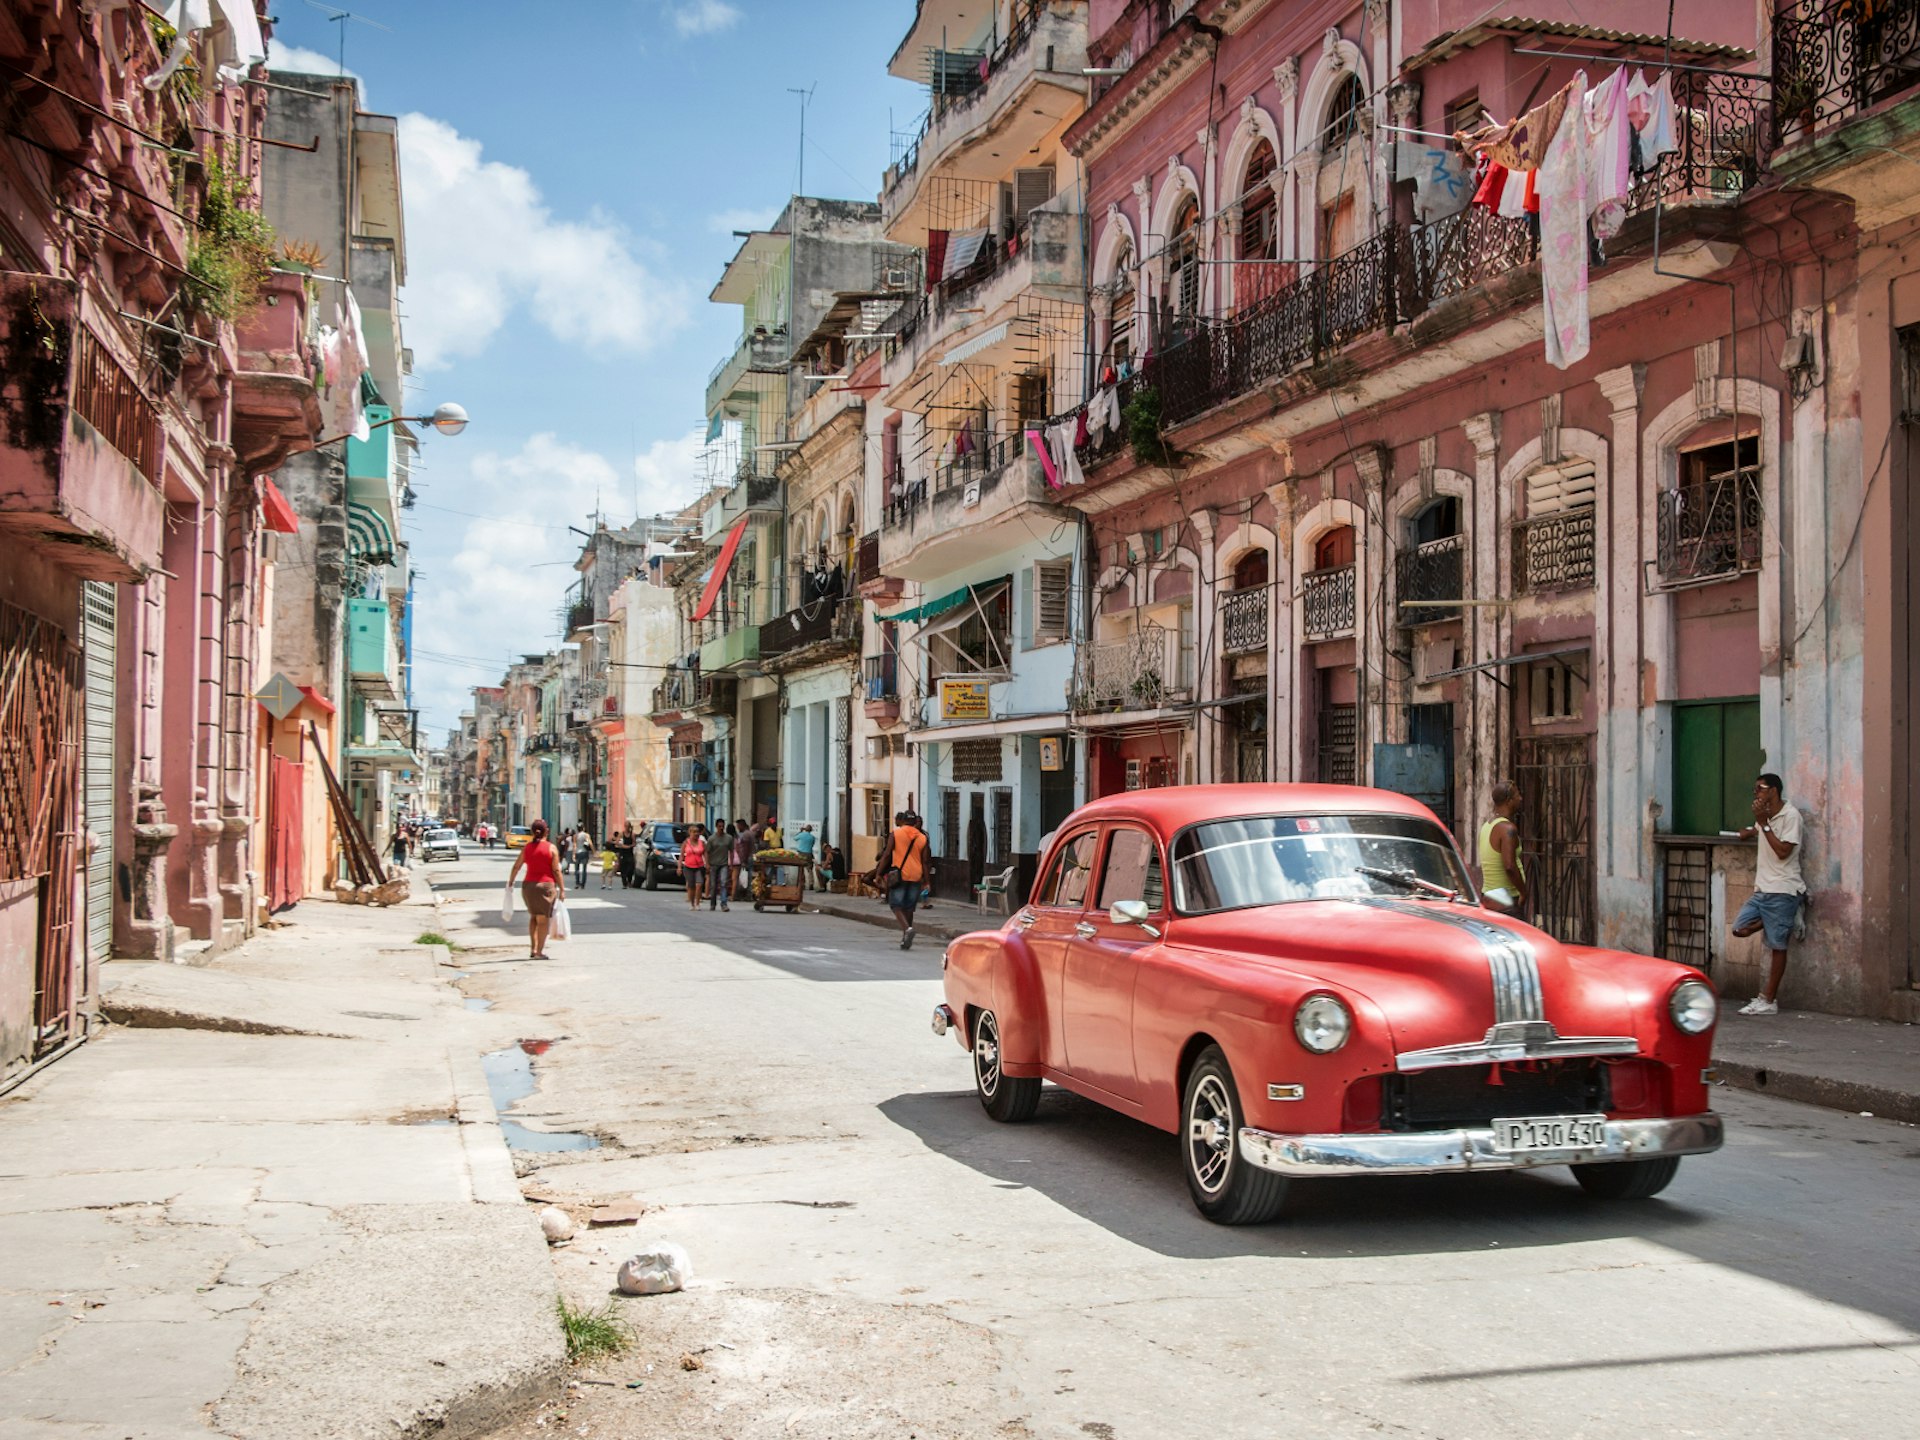 A classic car on the streets of Havana © Atomazul / Shutterstock